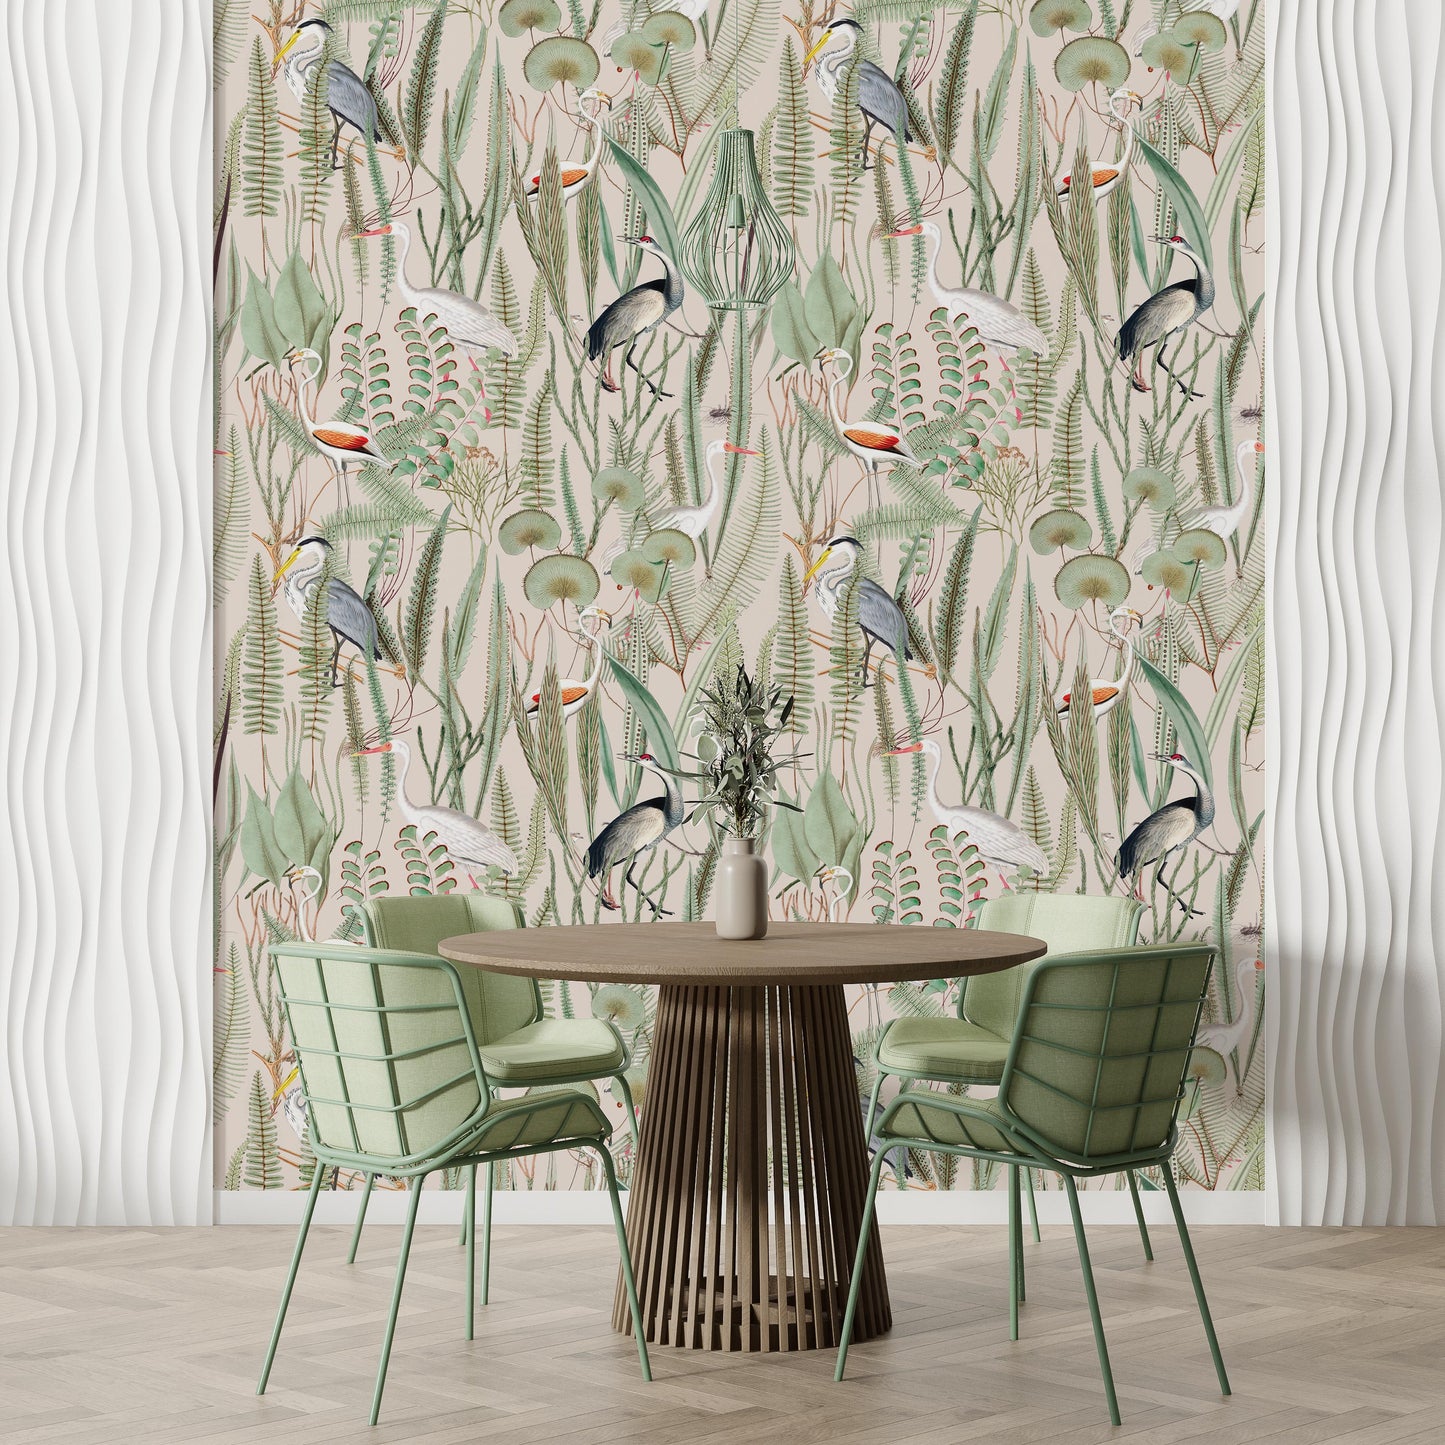 Enrich your dining room with a touch of nature's charm with our captivating pink botanical crane peel-and-stick accent wallpaper. This statement piece features graceful herons amidst a vibrant floral tapestry, creating a visually captivating backdrop for your dining area. Complement the wallpaper's serene hues with green chairs and a wooden round table, adding a touch of warmth and sophistication to your dining experience.